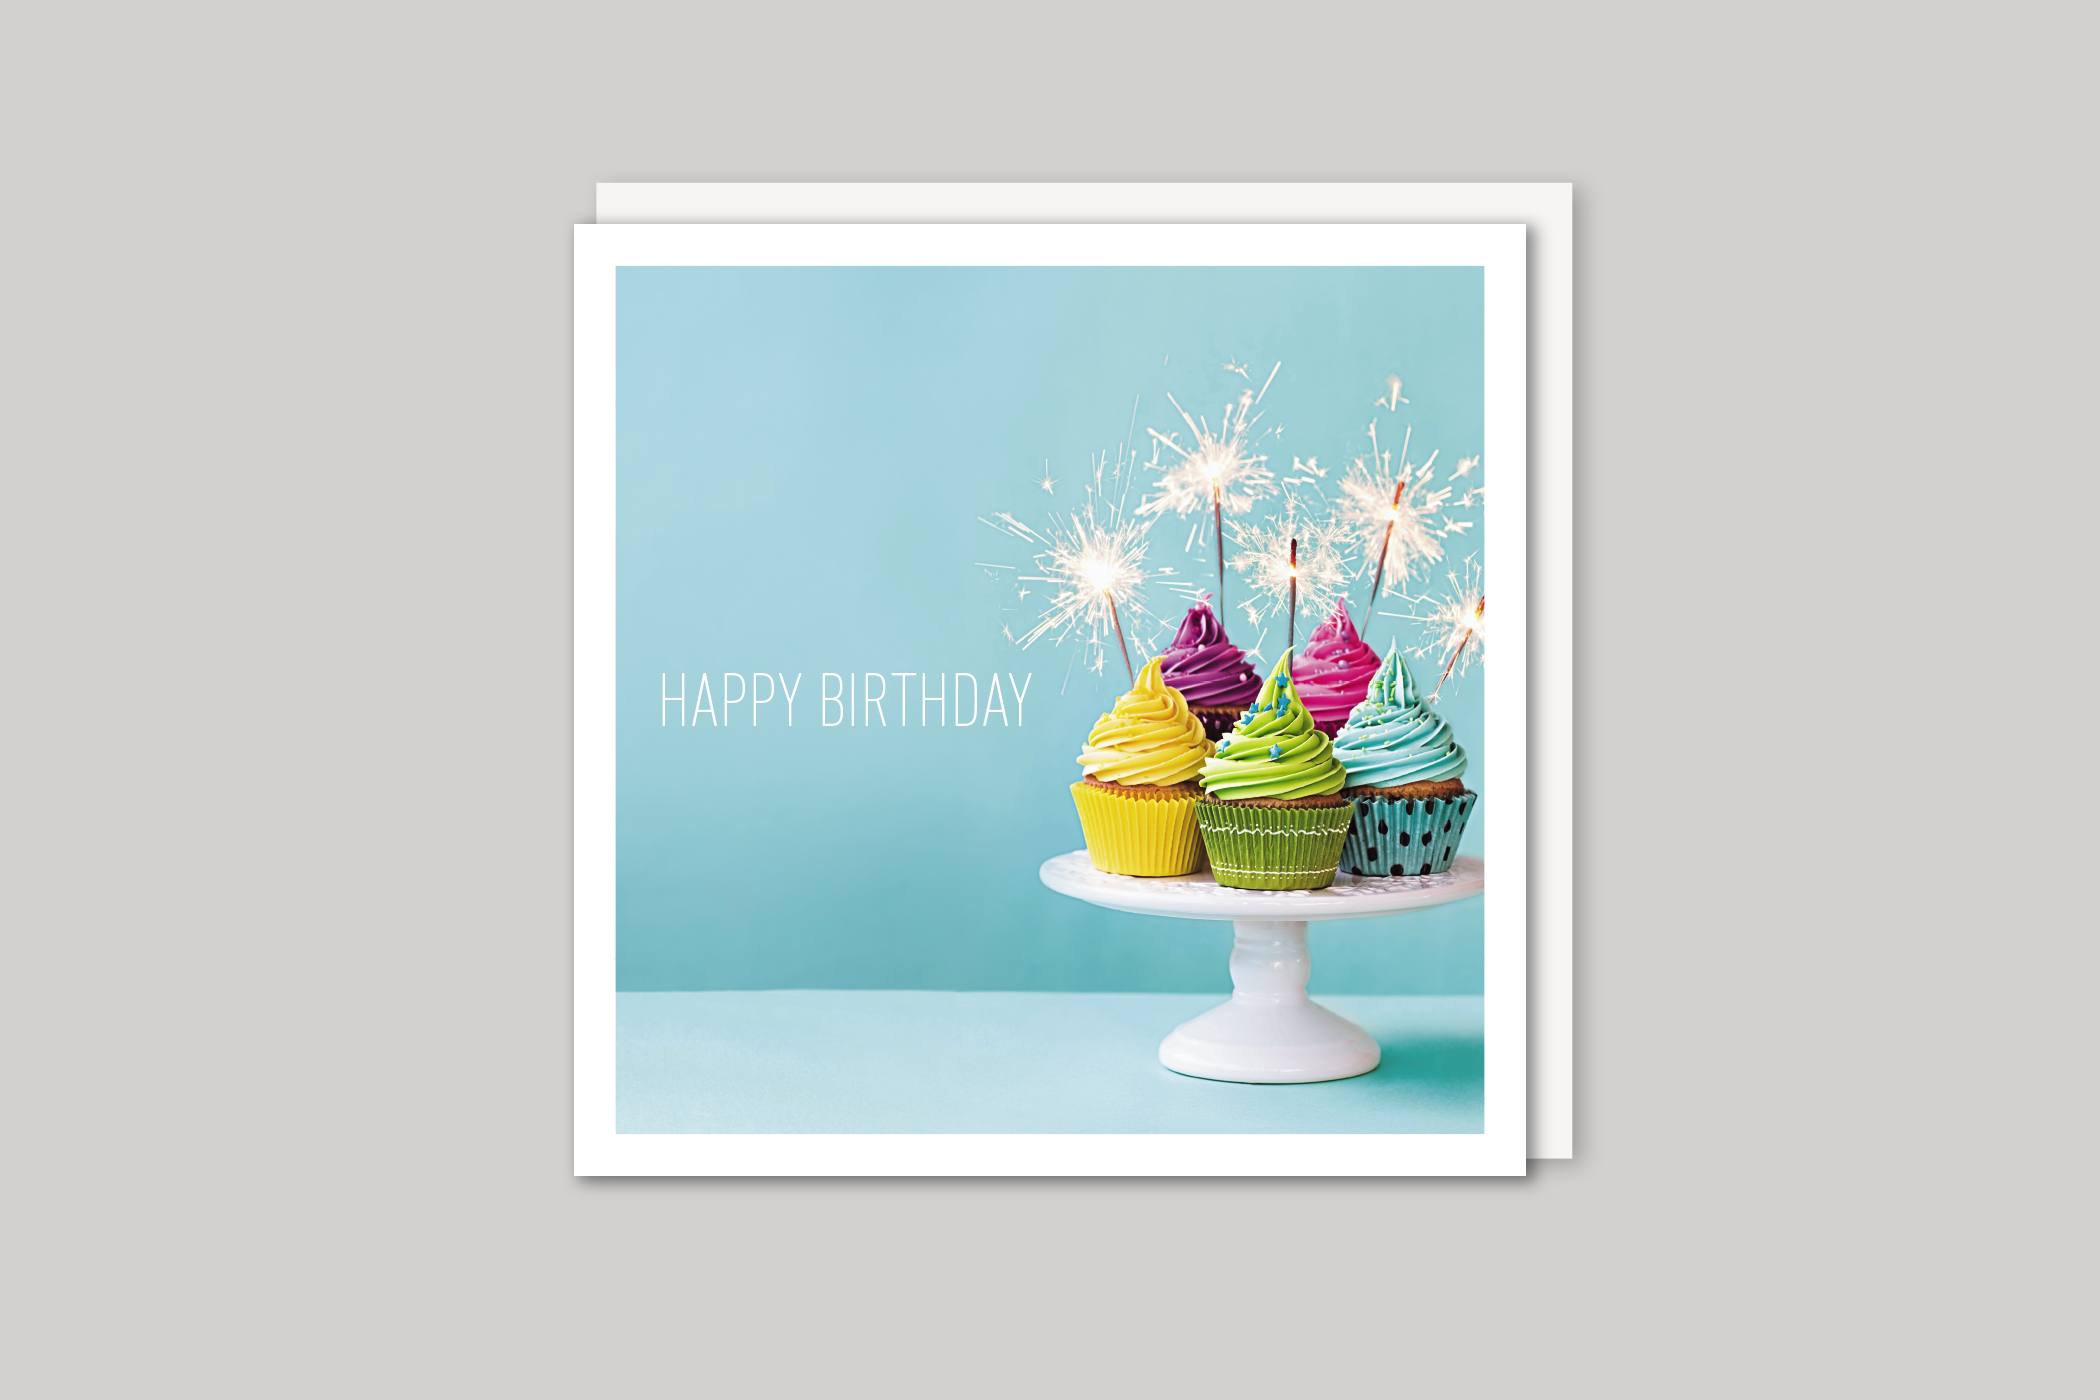 Happy Birthday Cupcakes from Beautiful Days range of contemporary photographic cards by Icon, back page.